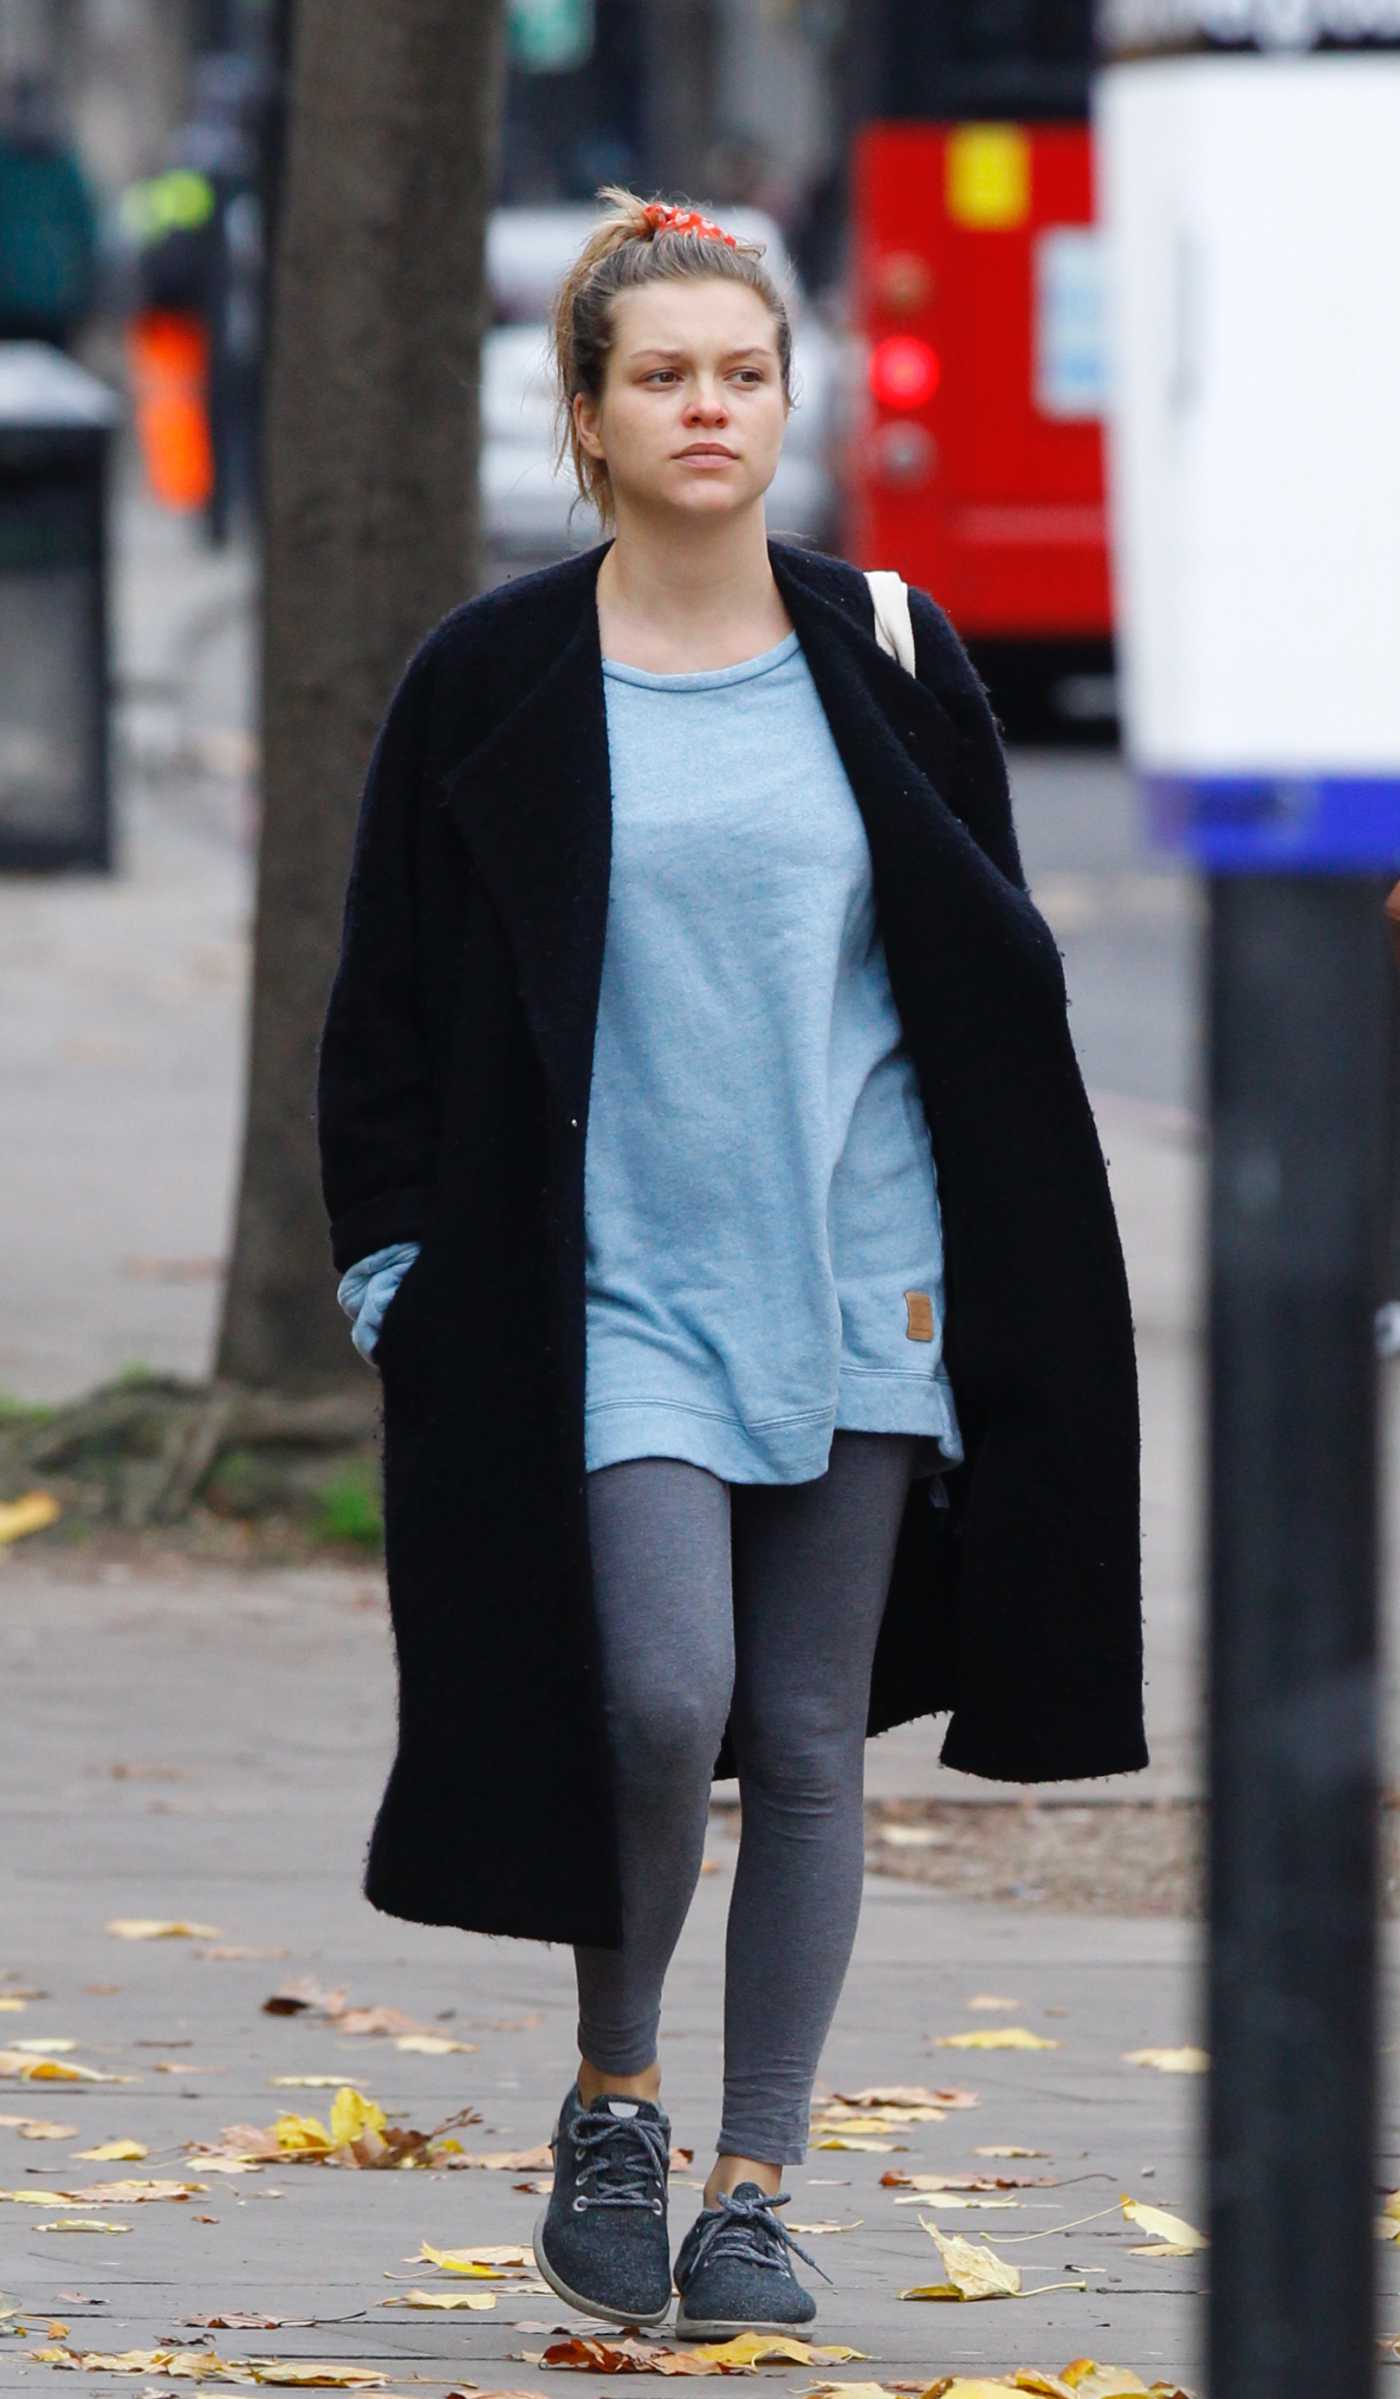 Sophie Cookson in a Black Coat Was Seen Out in London 11/16/2020